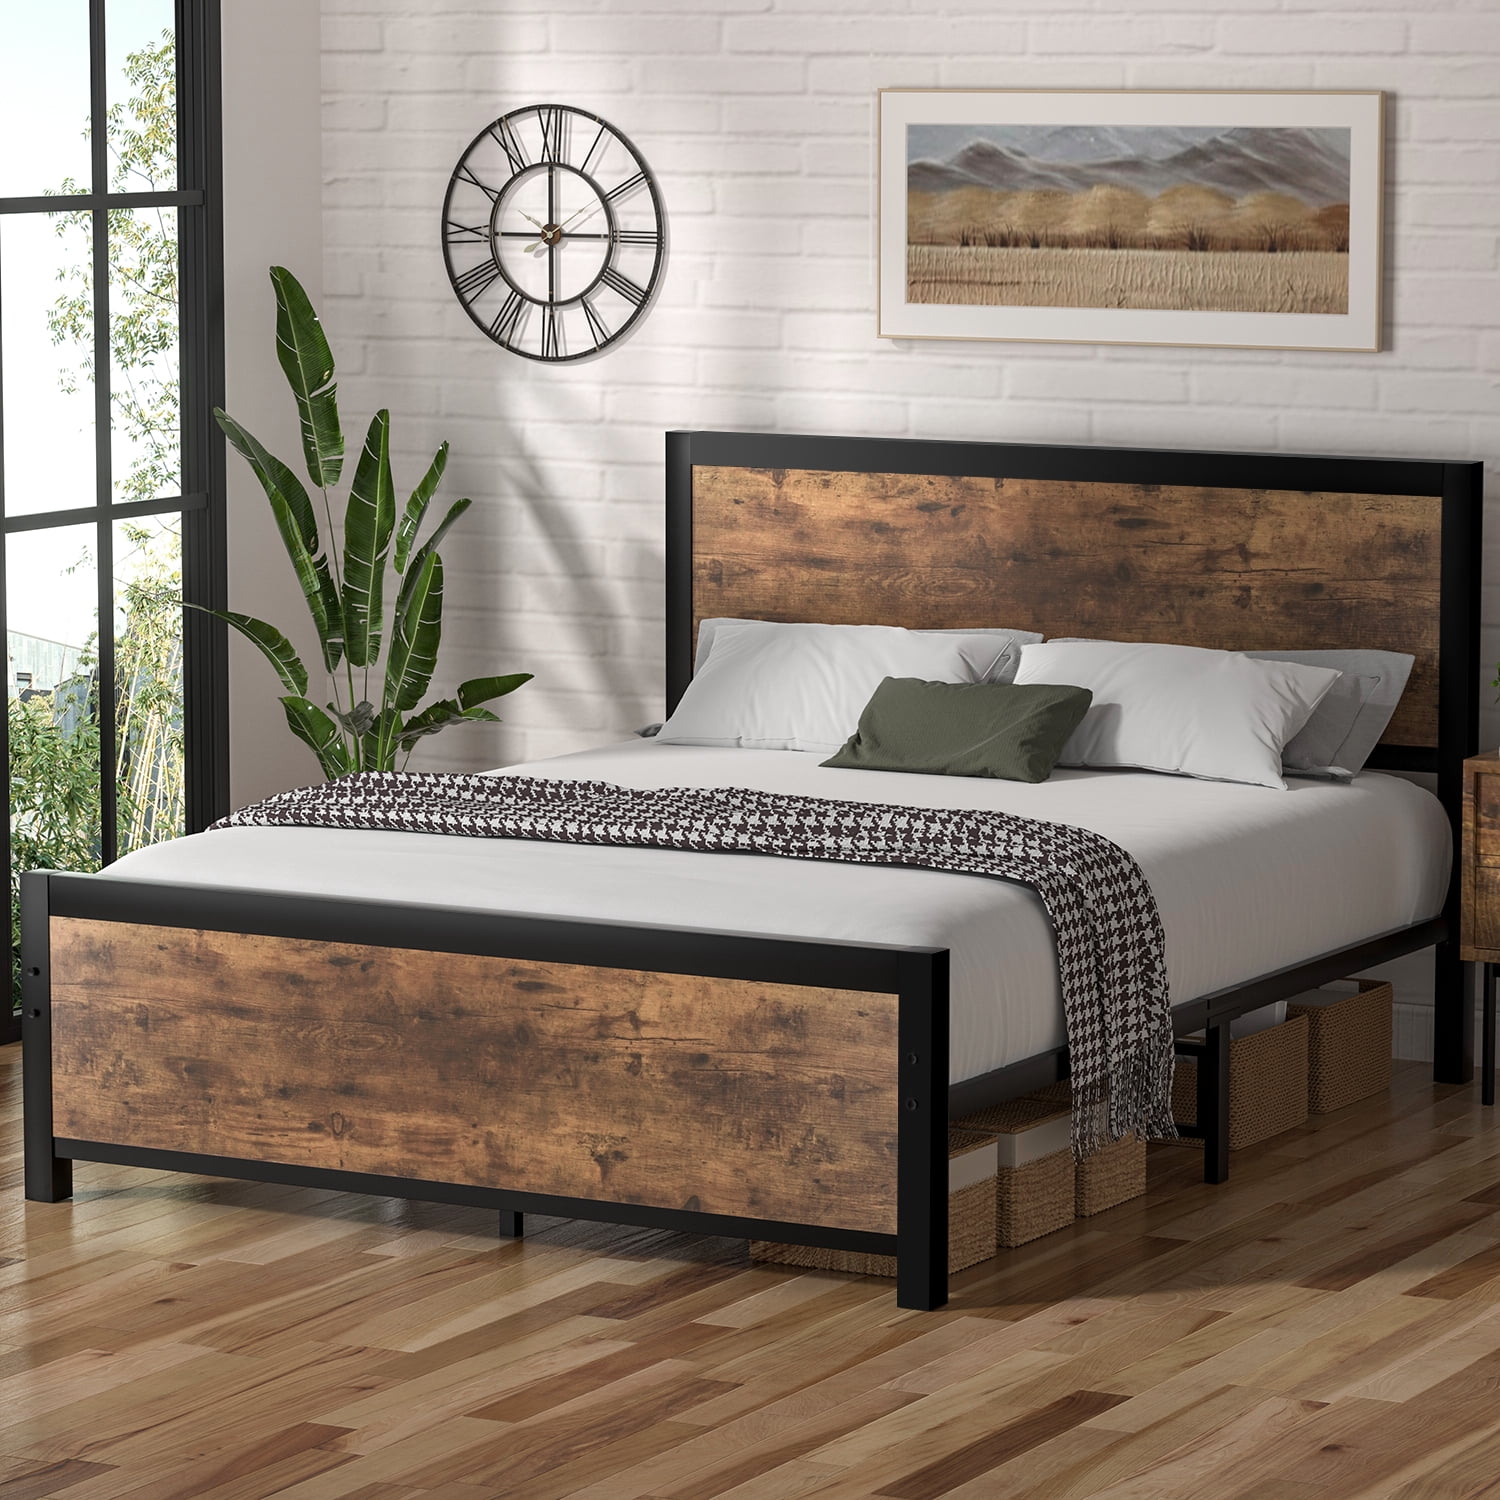 Queen Size Platform Metal Bed Frame with Wooden Headboard and Footboard,  Rustic Country Style Mattress Foundation, Brown